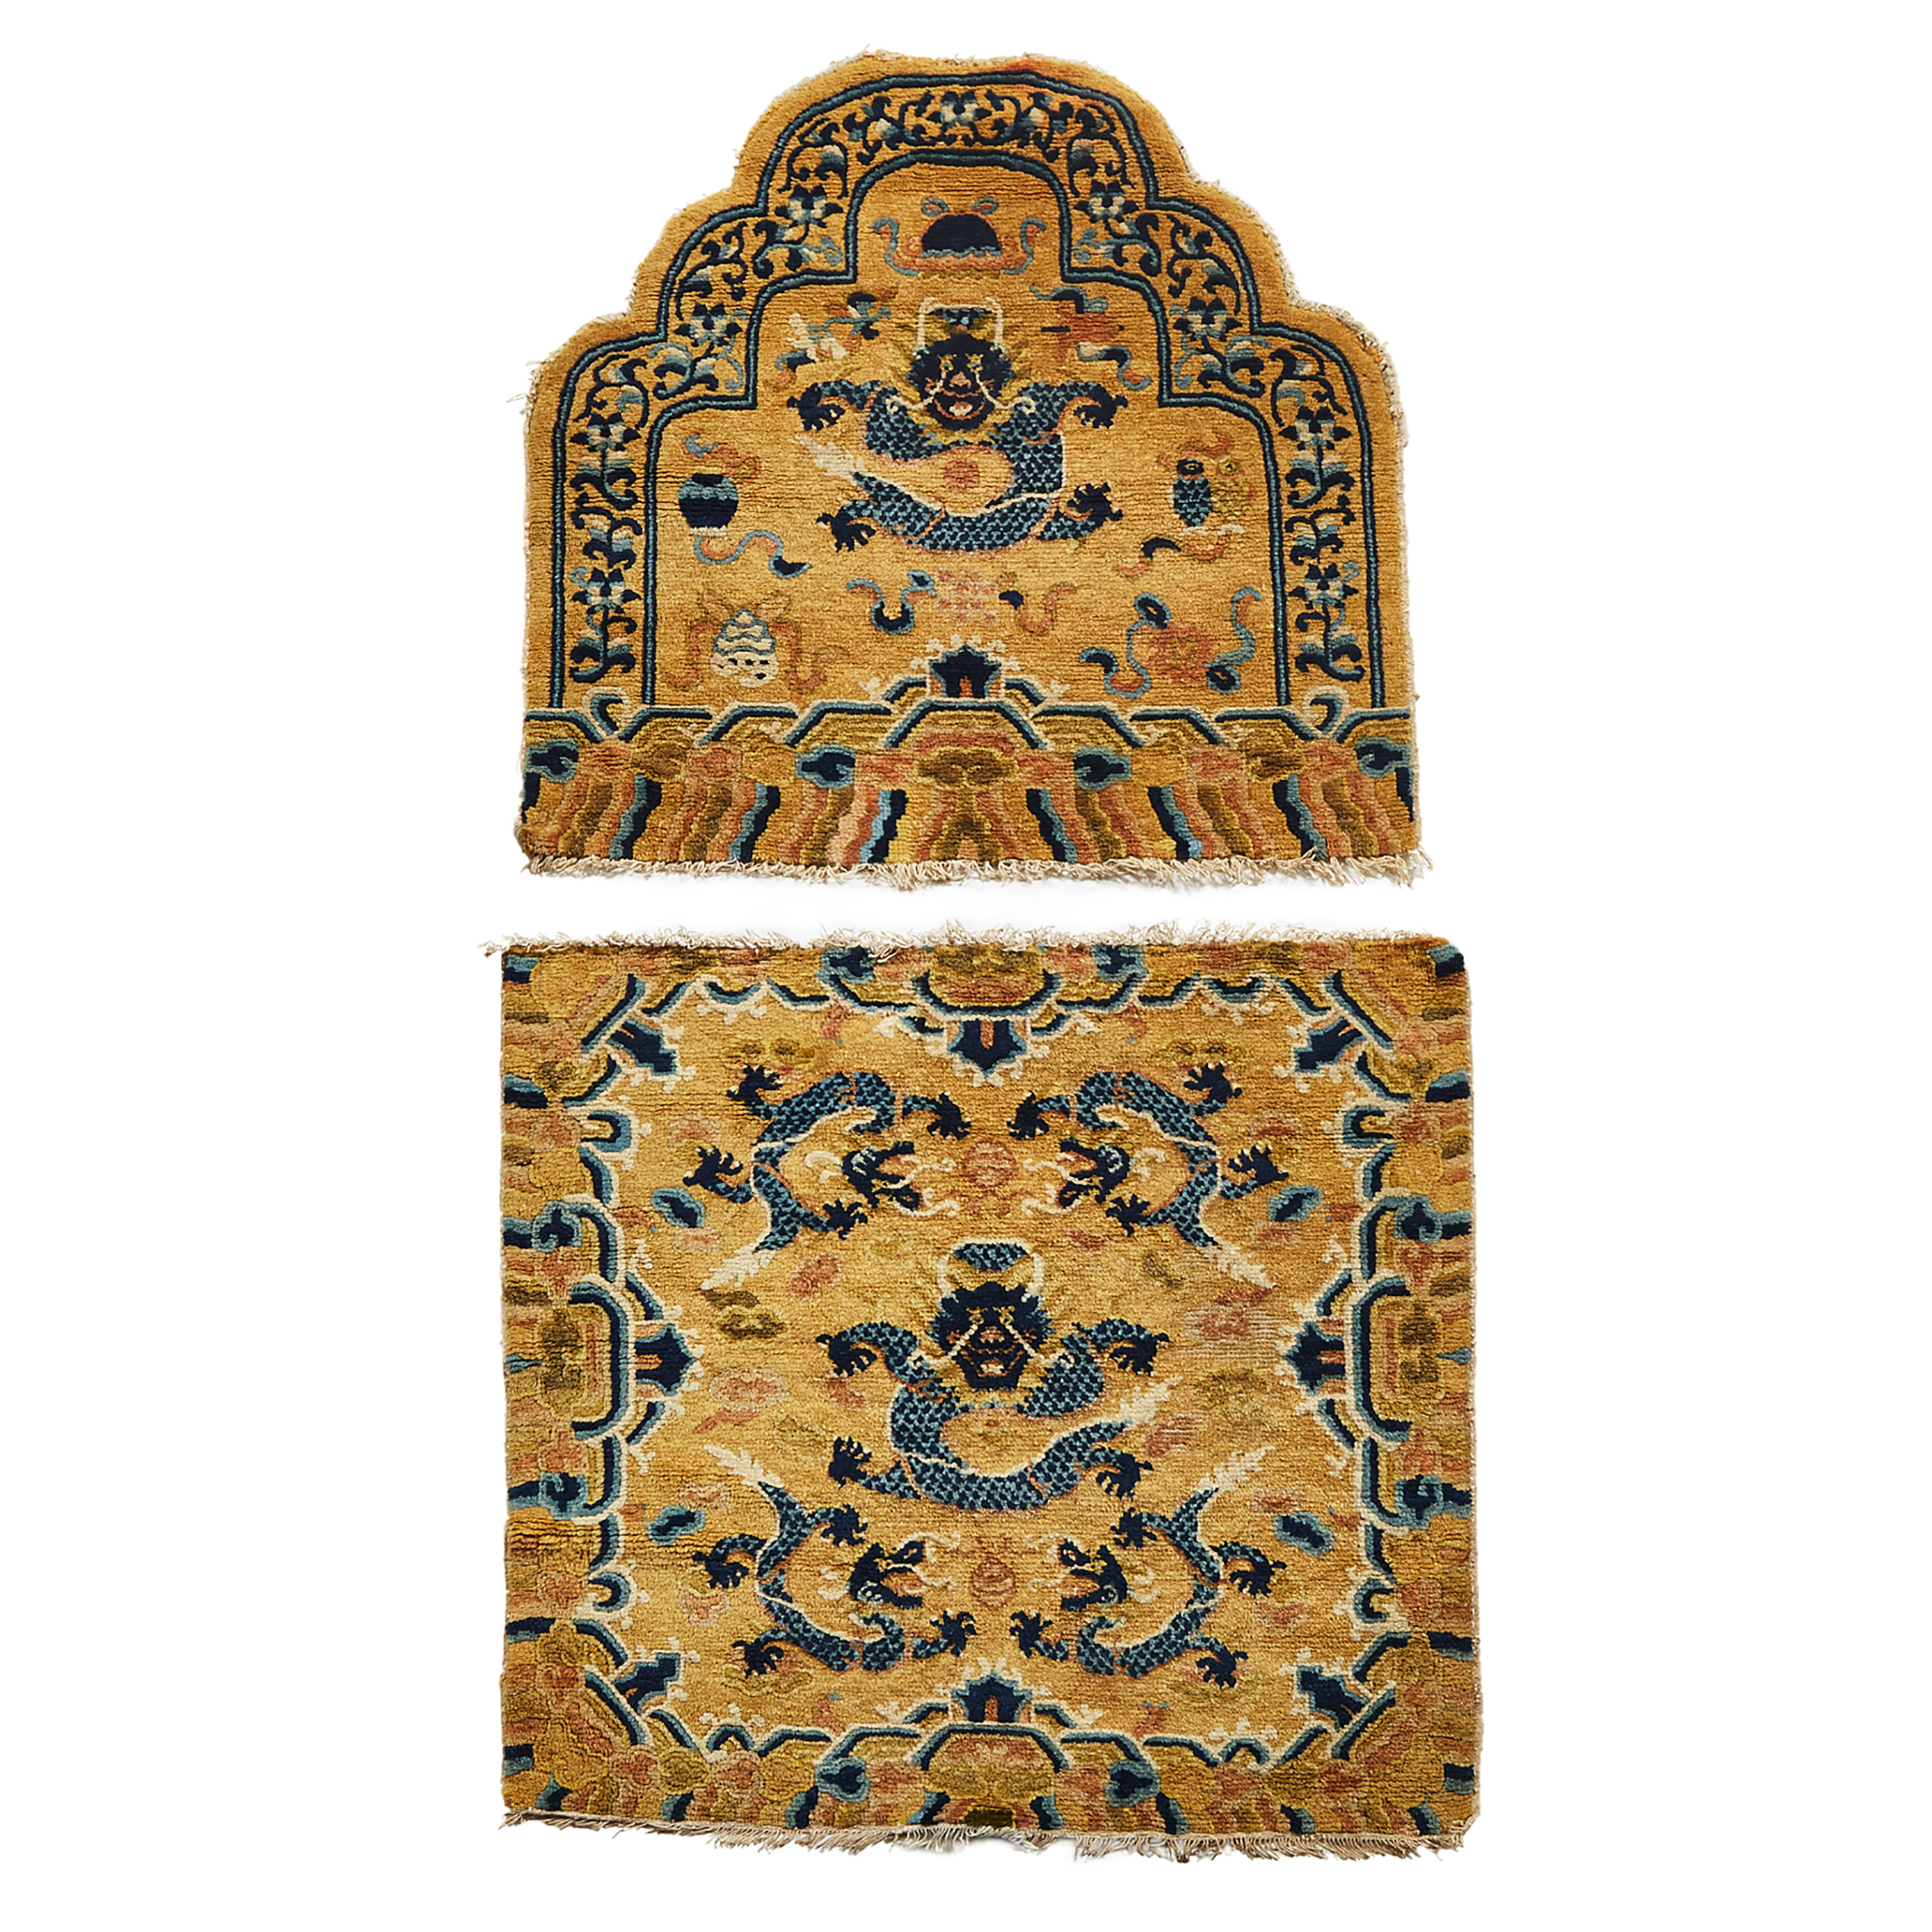 Two Piece Chinese Throne Cover, late 19th century